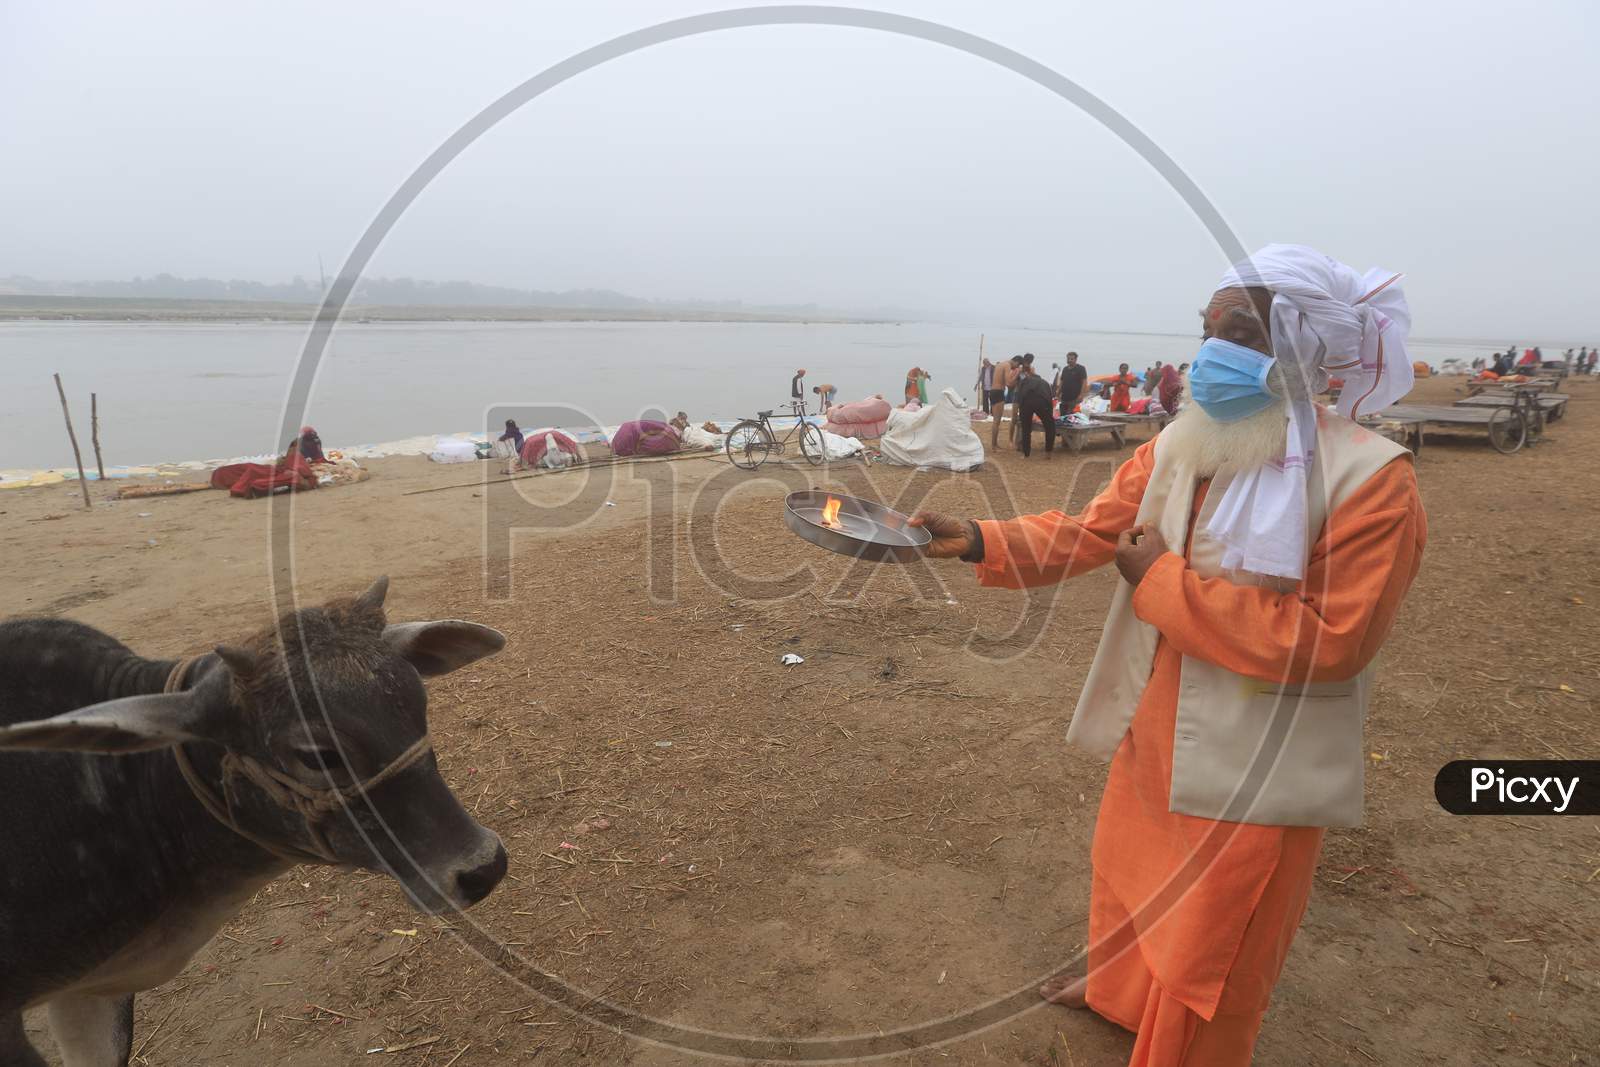 Hindu  Sadu Or baba Performing Aarthi To Holy Cow Wearing Surgical Mask For Safety From Corona Virus Outbreak  In India At Prayagraj